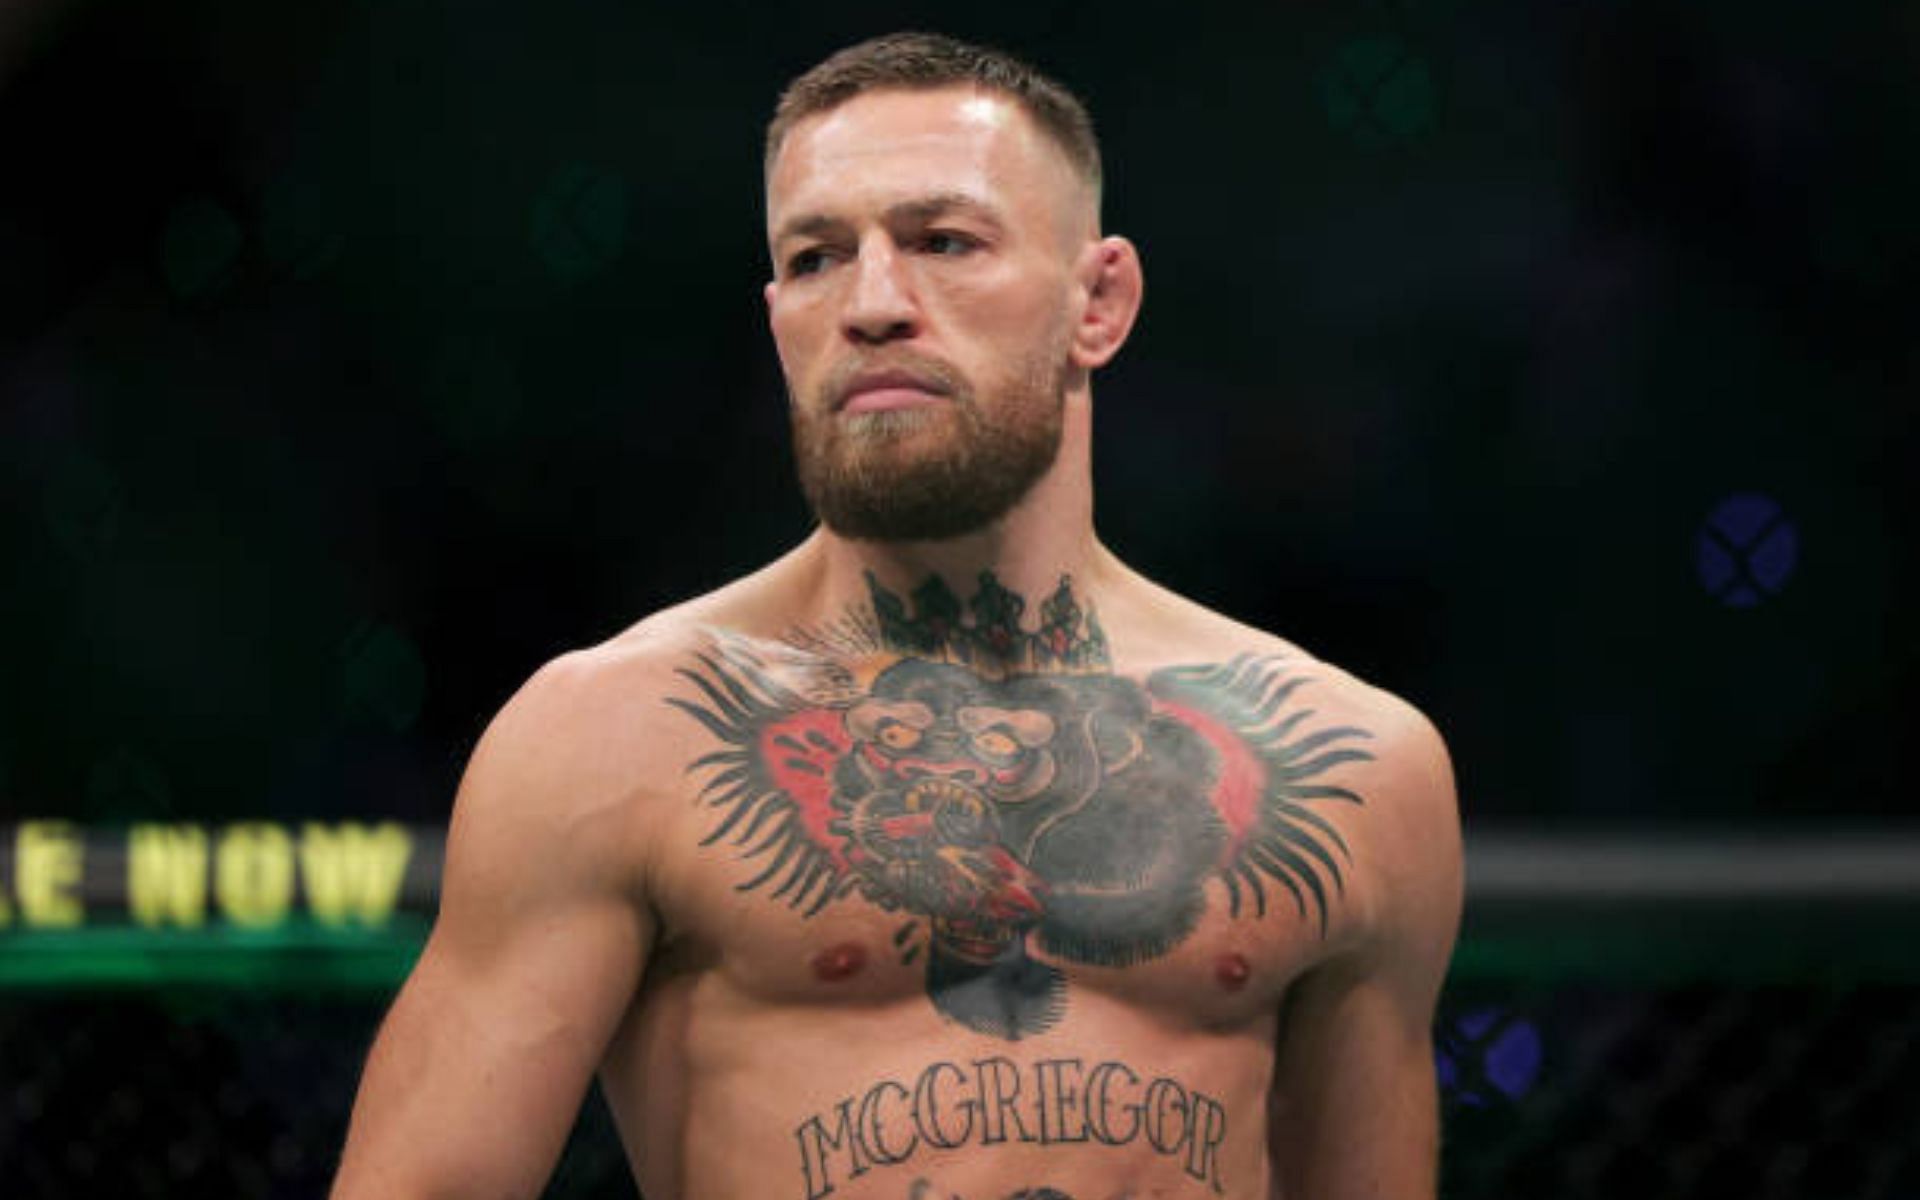 Former double champ Conor McGregor